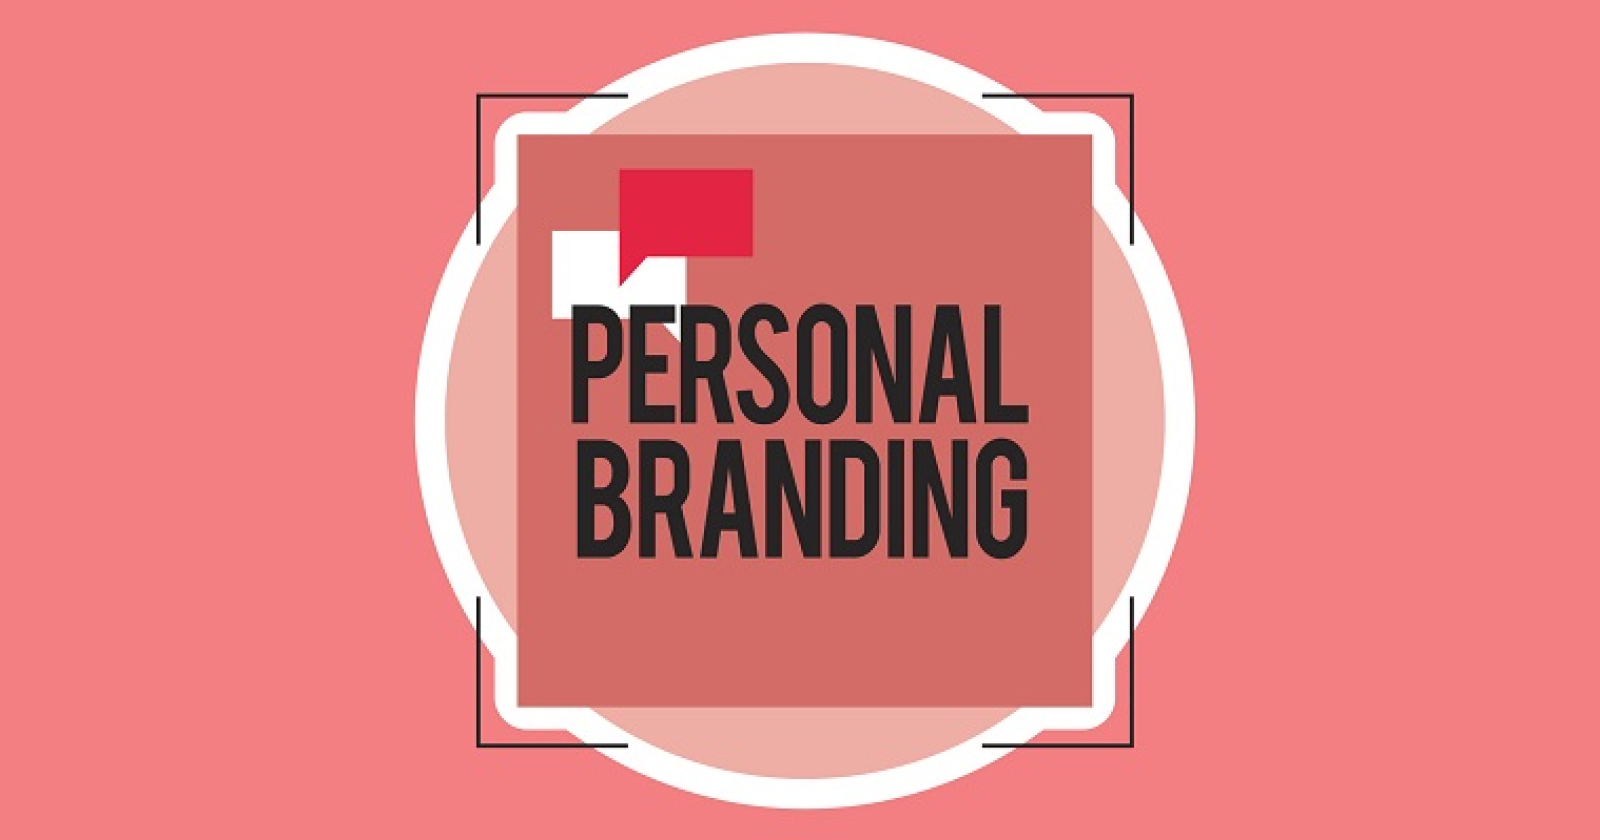 5 Personal Branding Tips for Every Marketer - Inc.com